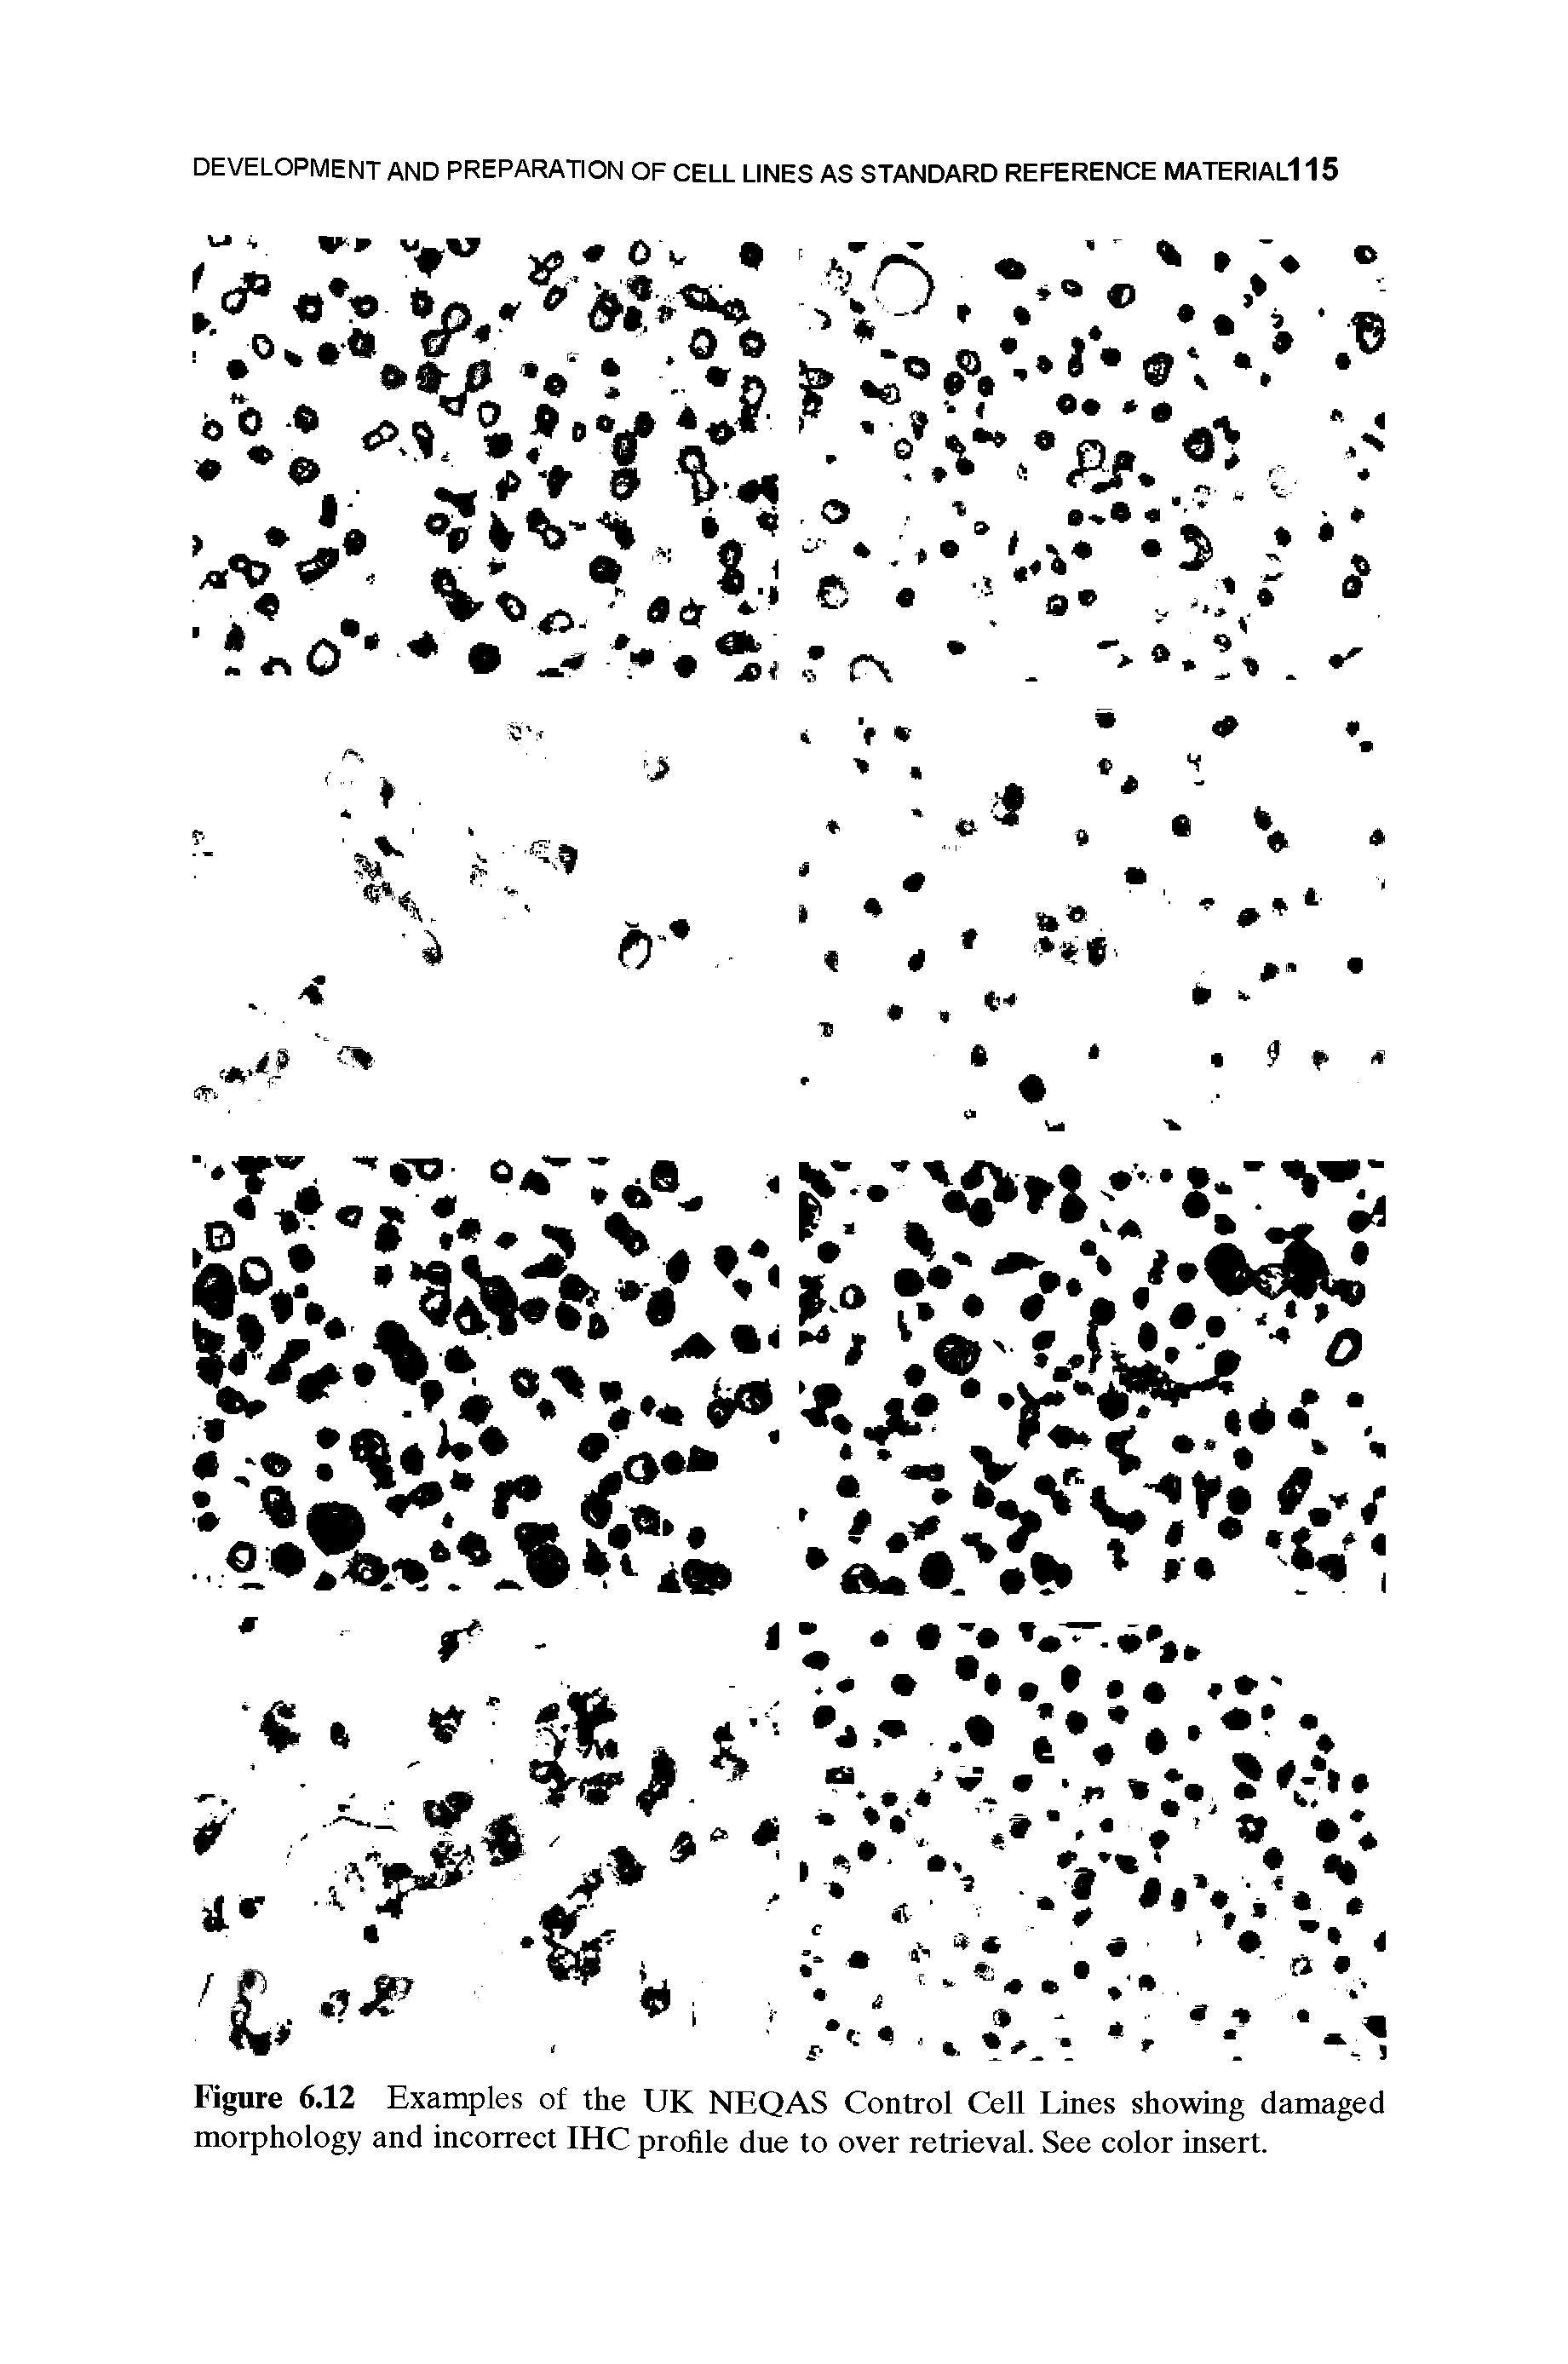 Figure 6.12 Examples of the UK NEQAS Control Cell Lines showing damaged morphology and incorrect IHC profile due to over retrieval. See color insert.